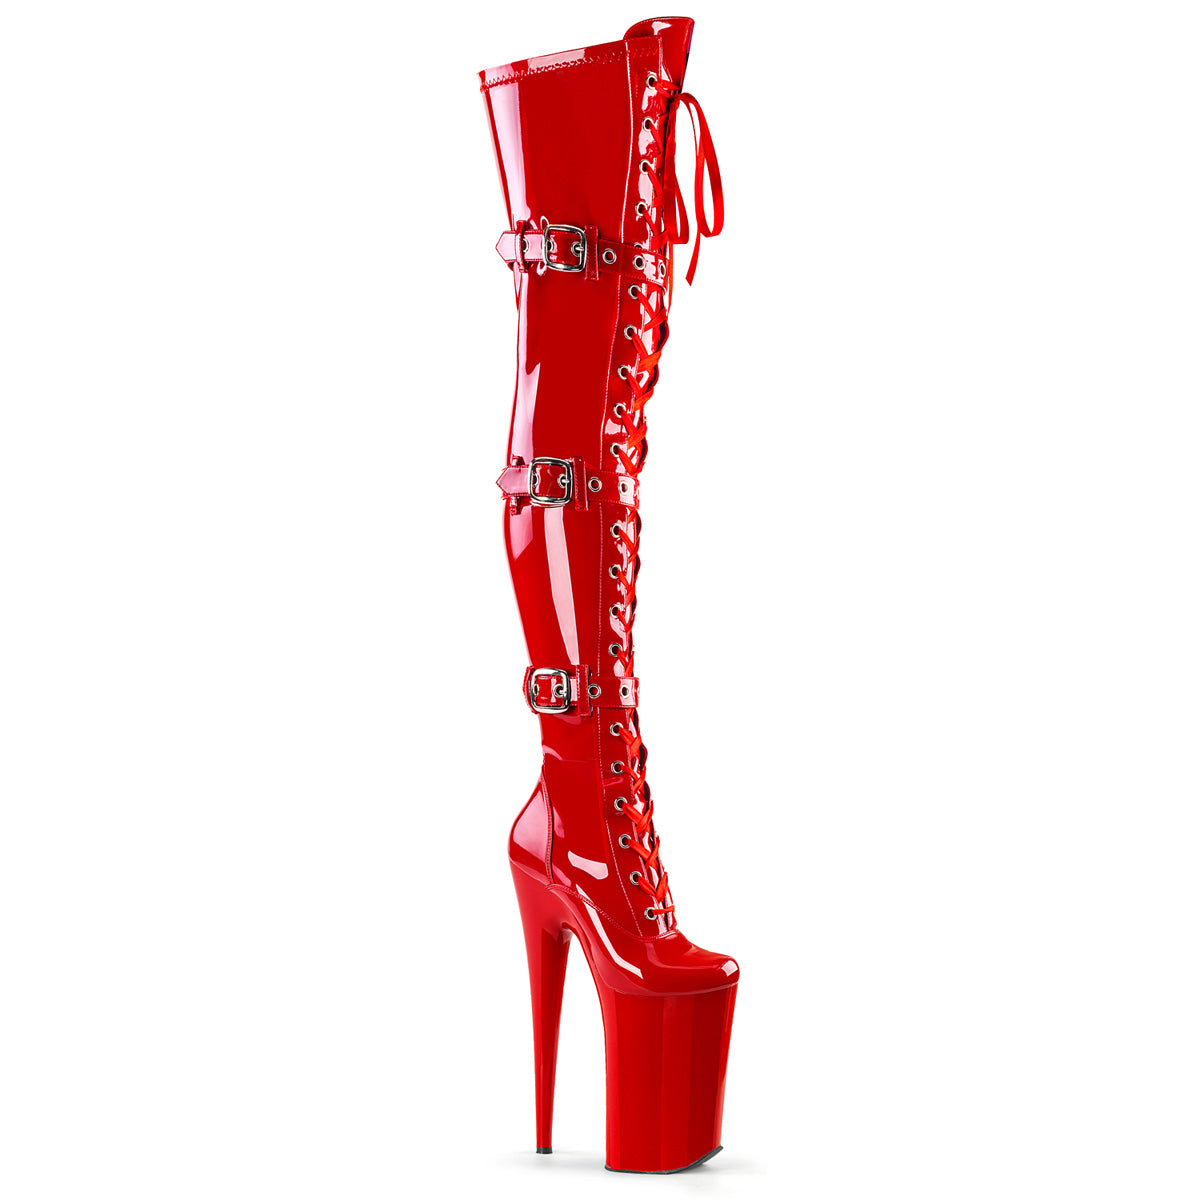 BEYOND-3028 Strippers Heels Pleaser Platforms (Exotic Dancing) Red Stretch Pat/Red